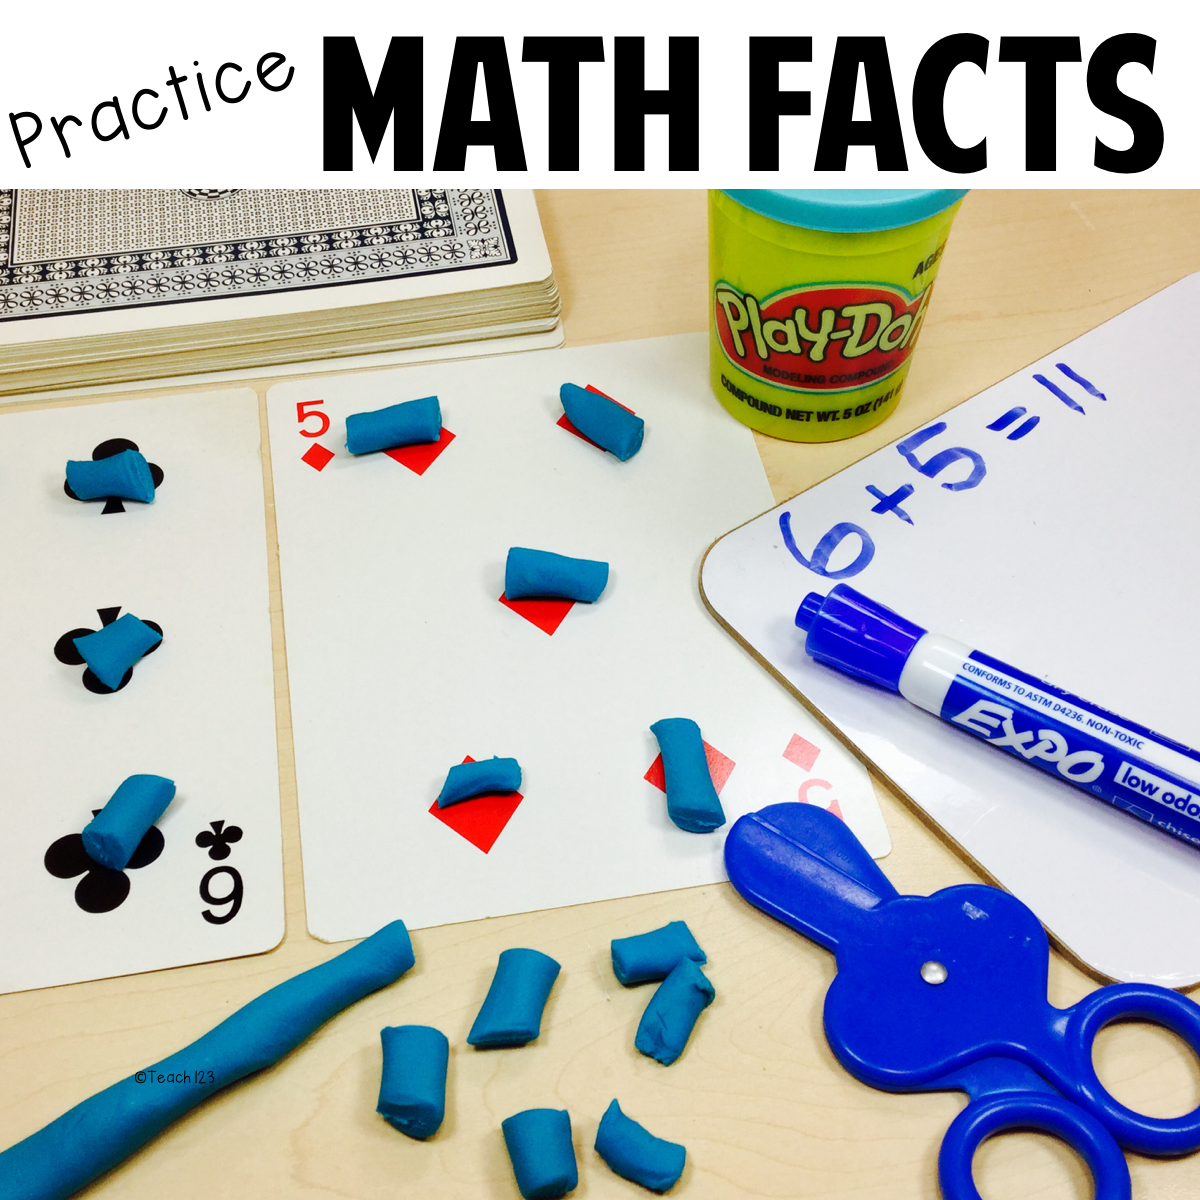 Play-Doh Ideas: Morning Tubs - Number Sense, Math Facts, & More